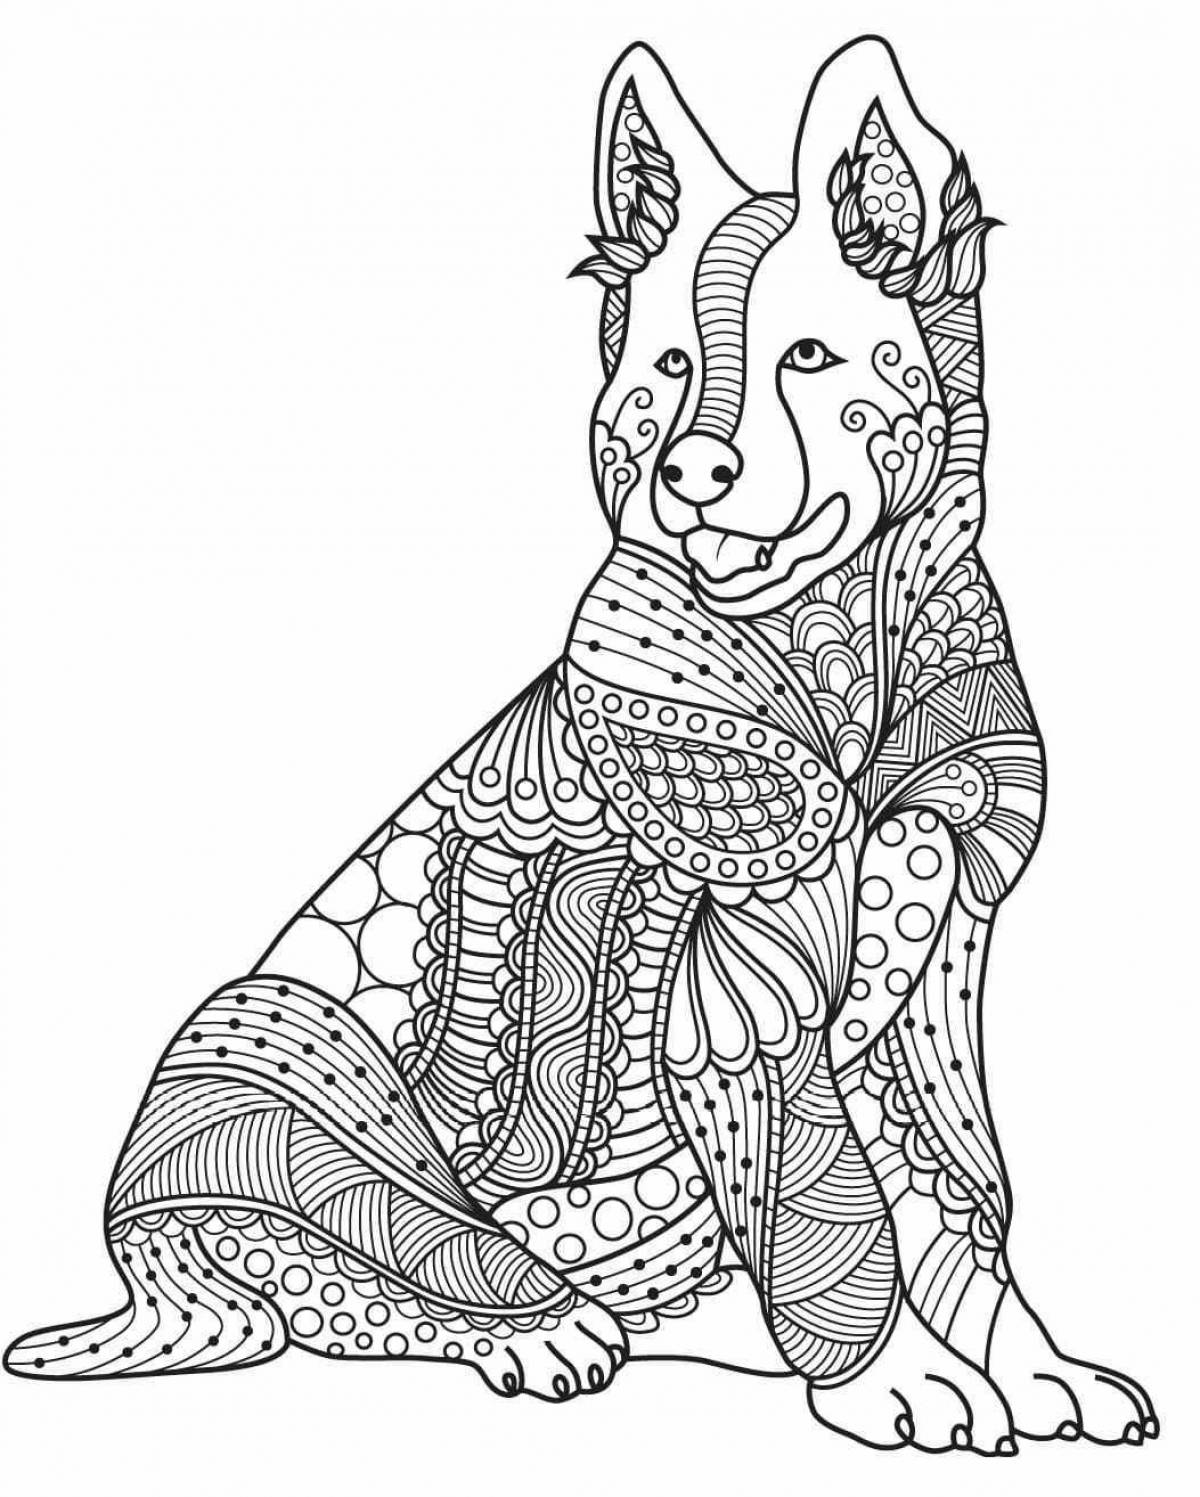 Adorable dog coloring with clothes